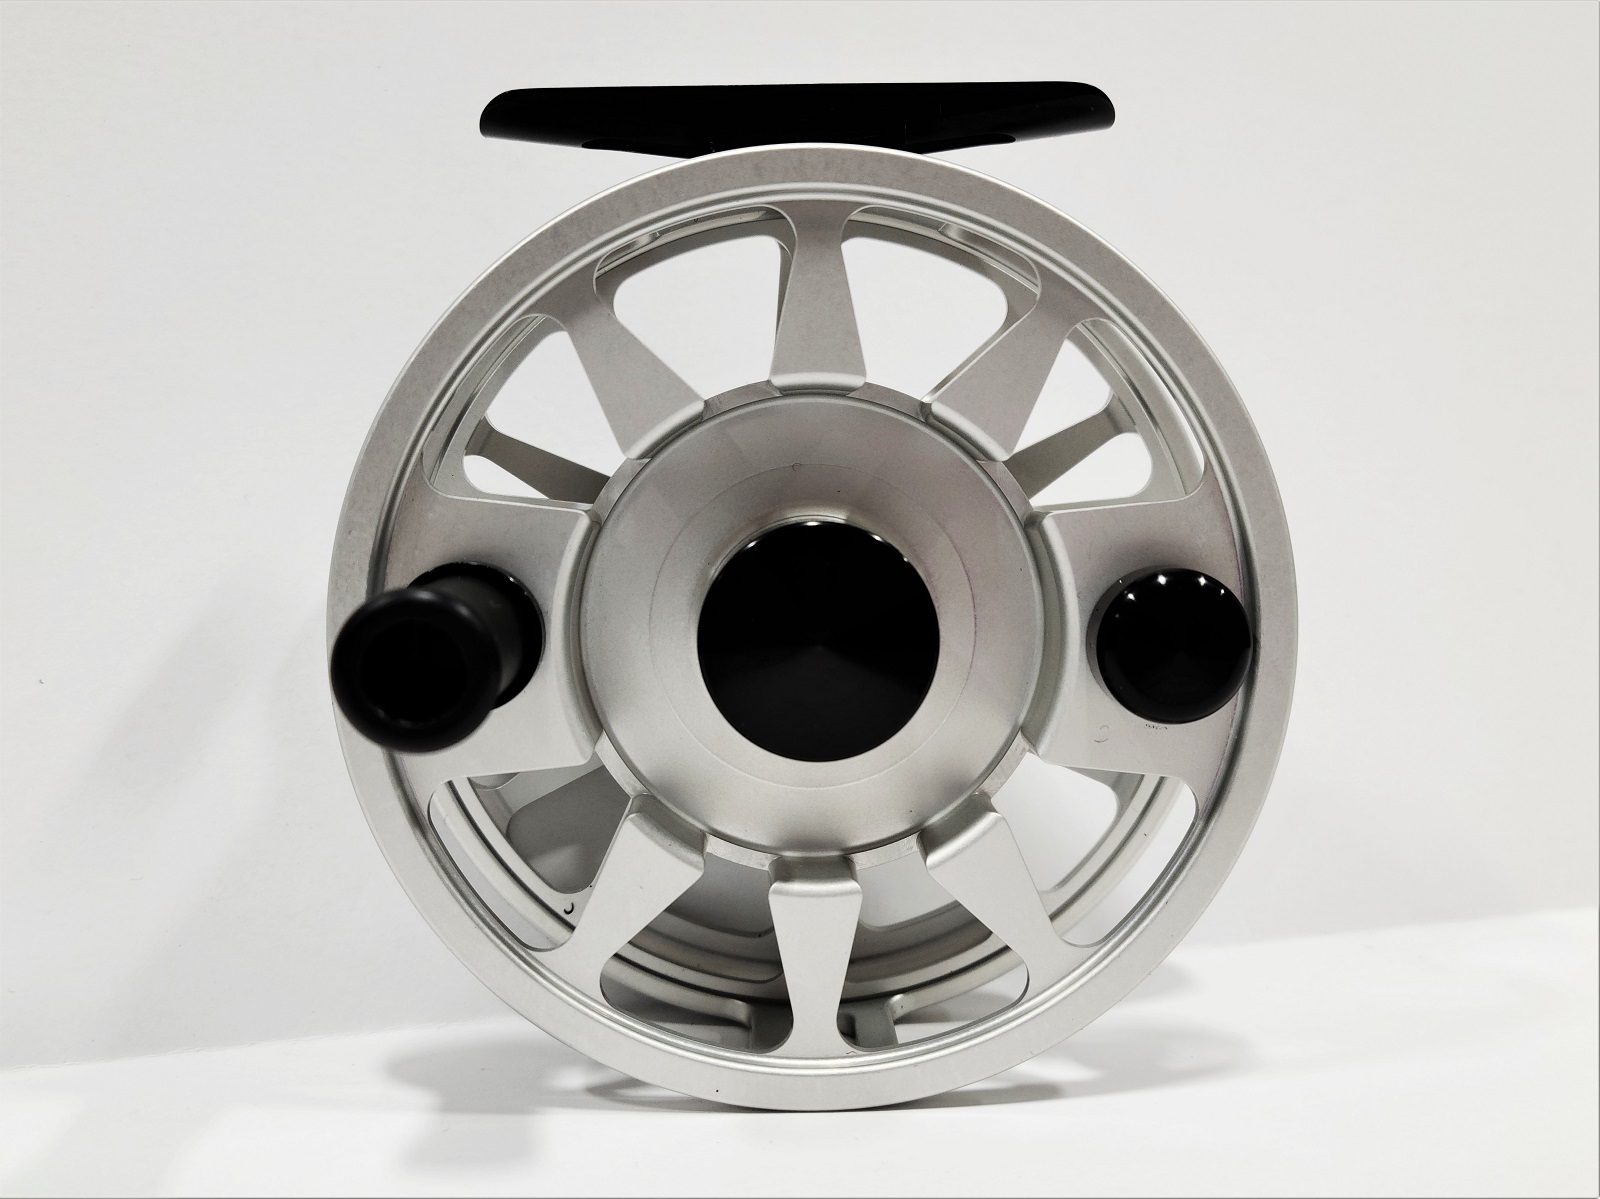 Gorge Fly Shop Blog: The All New Tibor BackCountry Fly Reel - In Stock Now